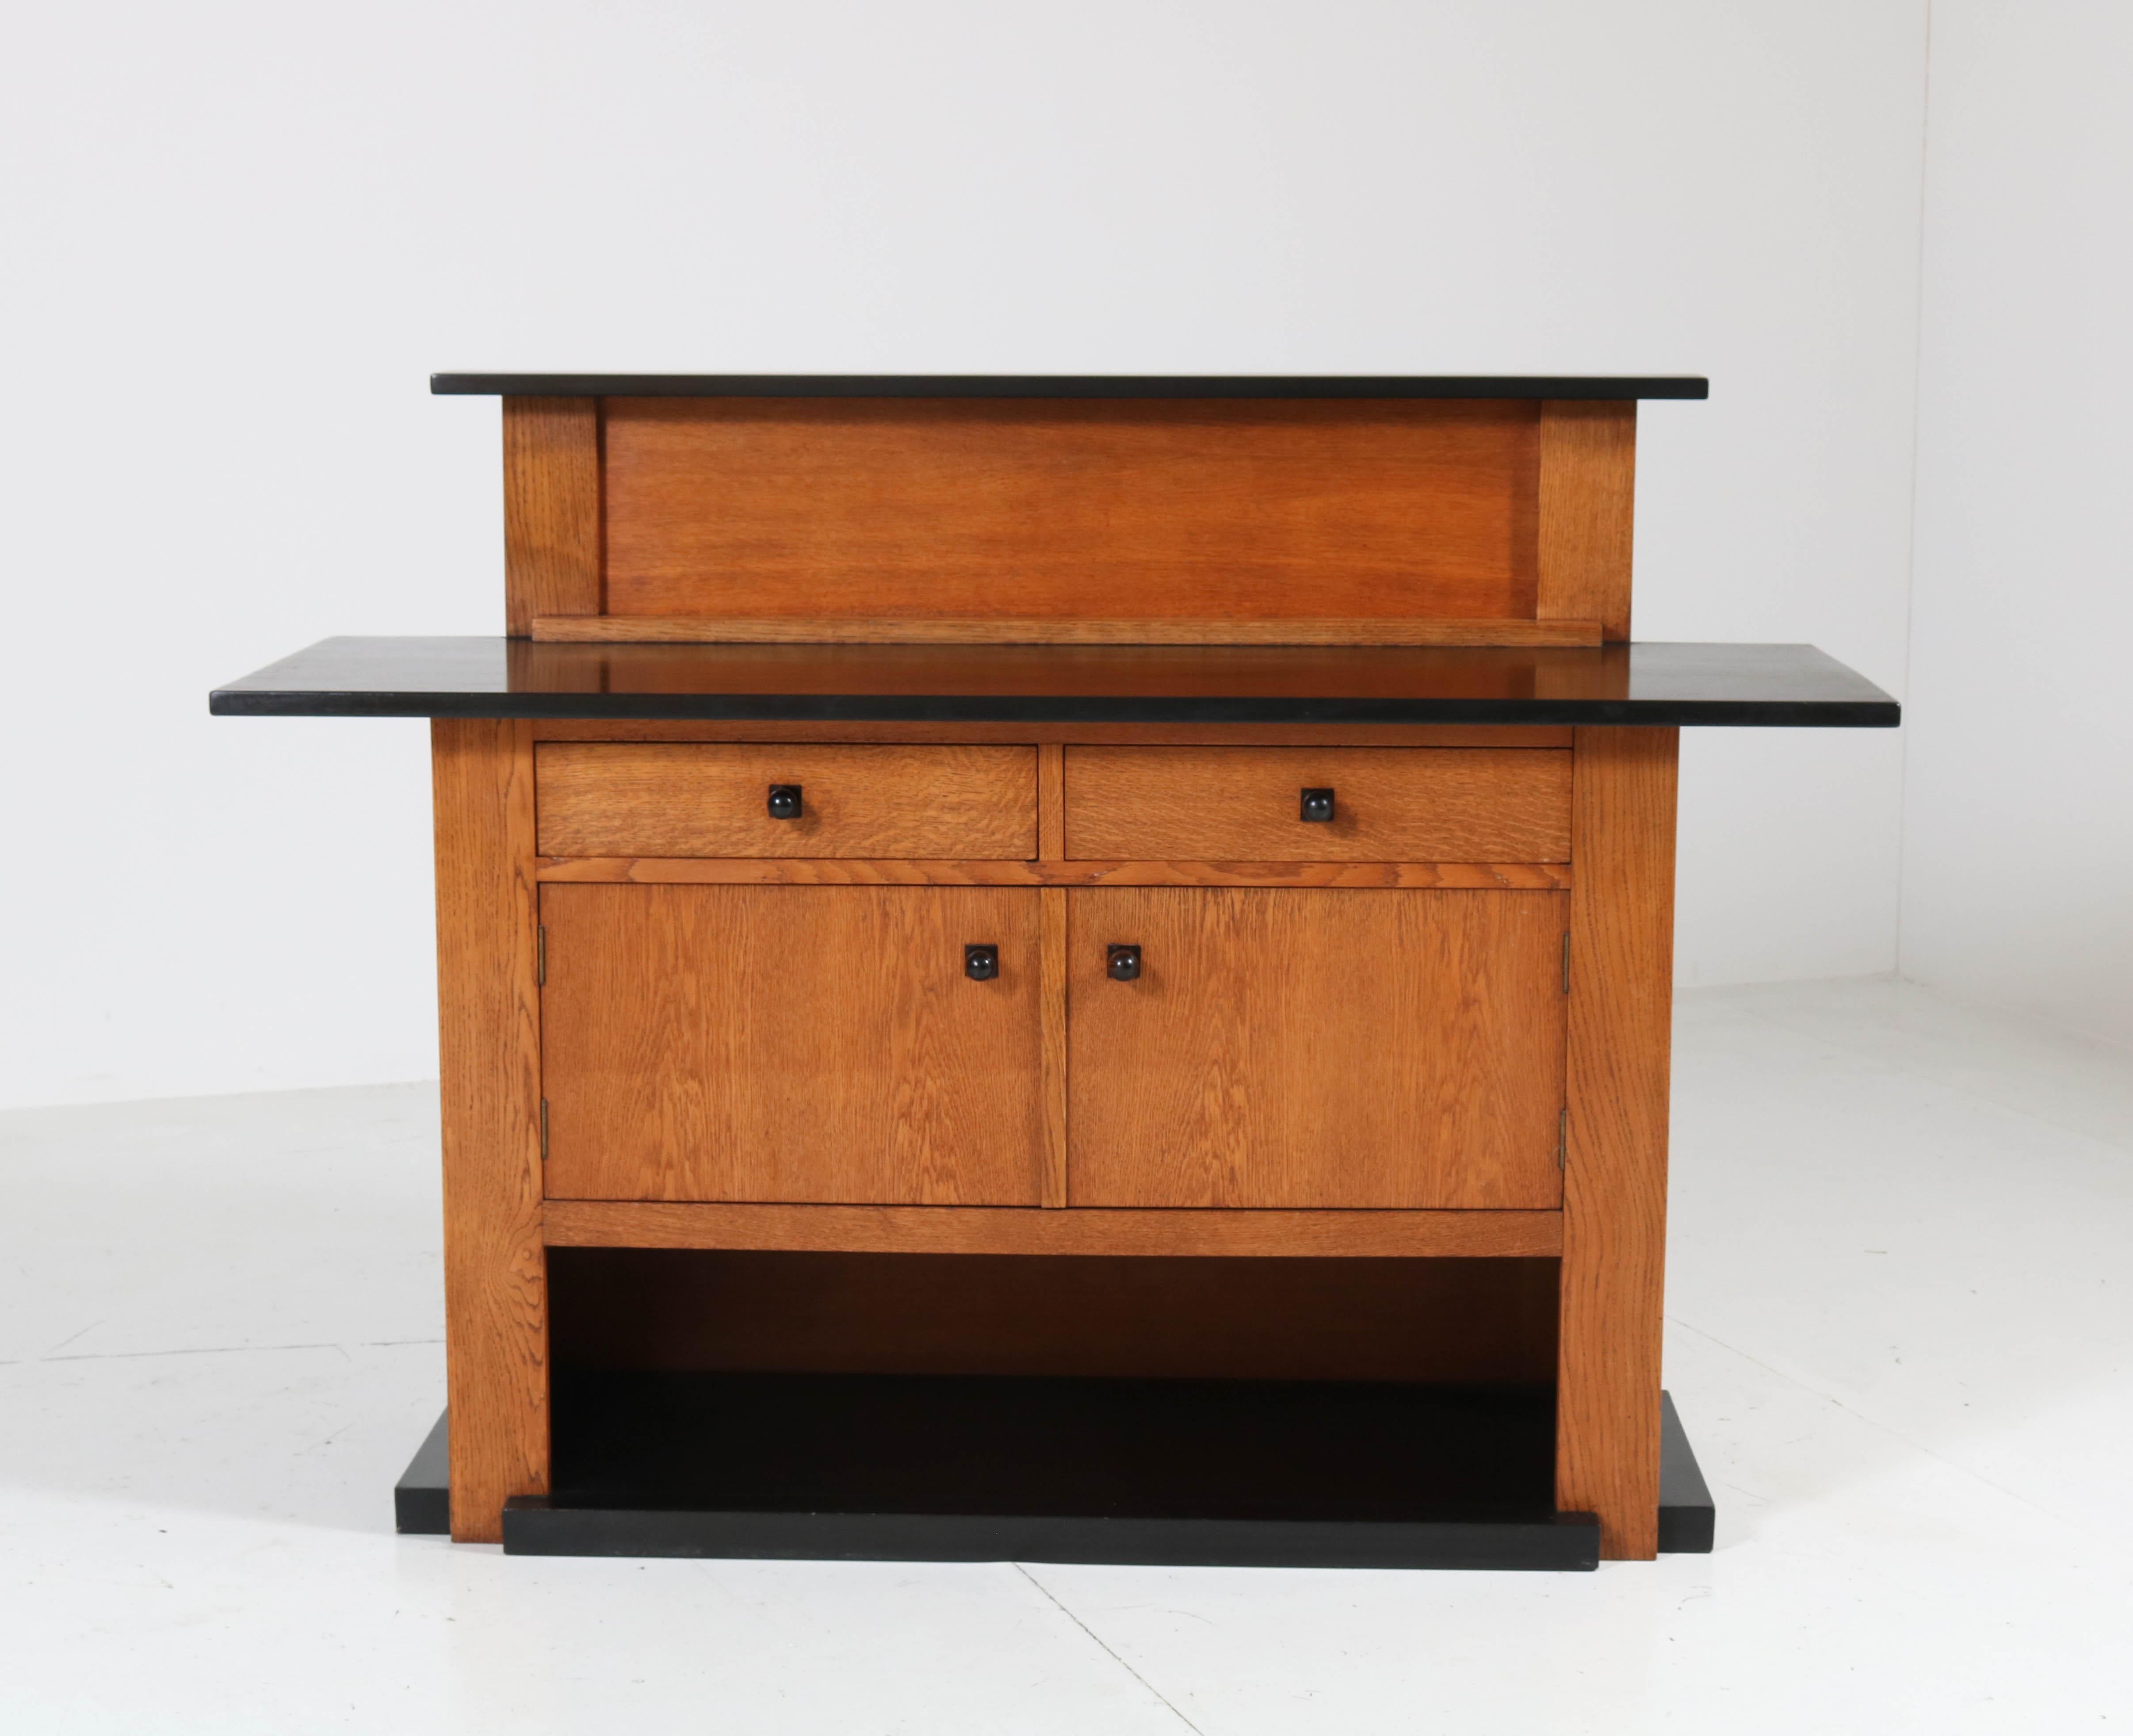 Magnificent and very rare Art Deco Haagse School sideboard or credenza.
Design by J.C. Jansen for L.O.V. Oosterbeek.
Striking Dutch design from the 1920s!
Solid oak with original black lacquered top and knobs.
Marked with original manufacturers